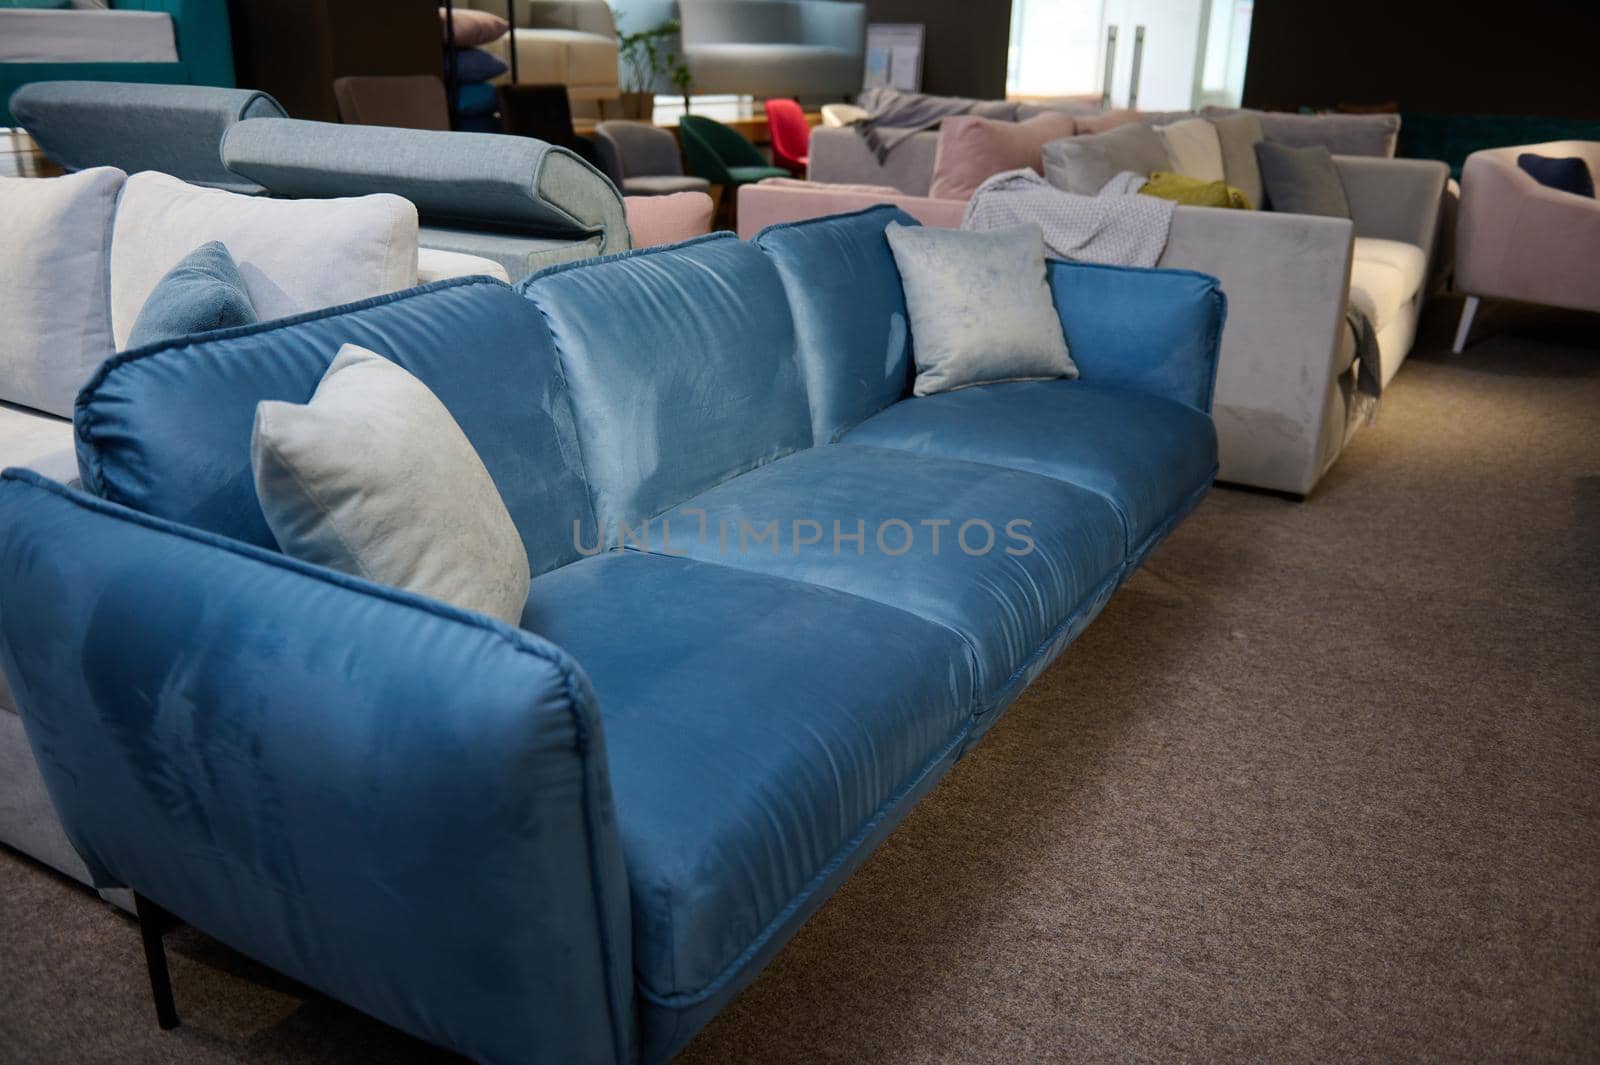 Beautiful minimalist stylish blue velour sofa with light gray pillows, displayed on sale in the furniture store showroom. Living room furnishing with stylish modern comfortable upholstered furniture. by artgf